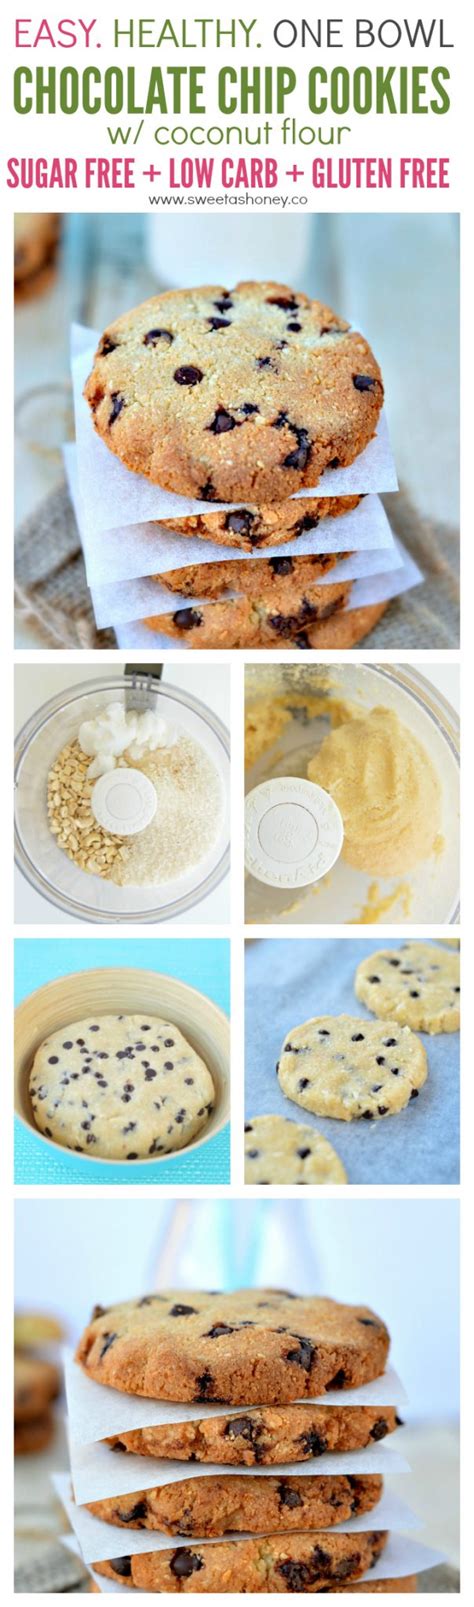 You can totally use these dairy free chocolate chips to make chocolate chip cookies, as shown in the recipe i've linked above. Sugar free chocolate chip cookies | Low Carb, Gluten Free